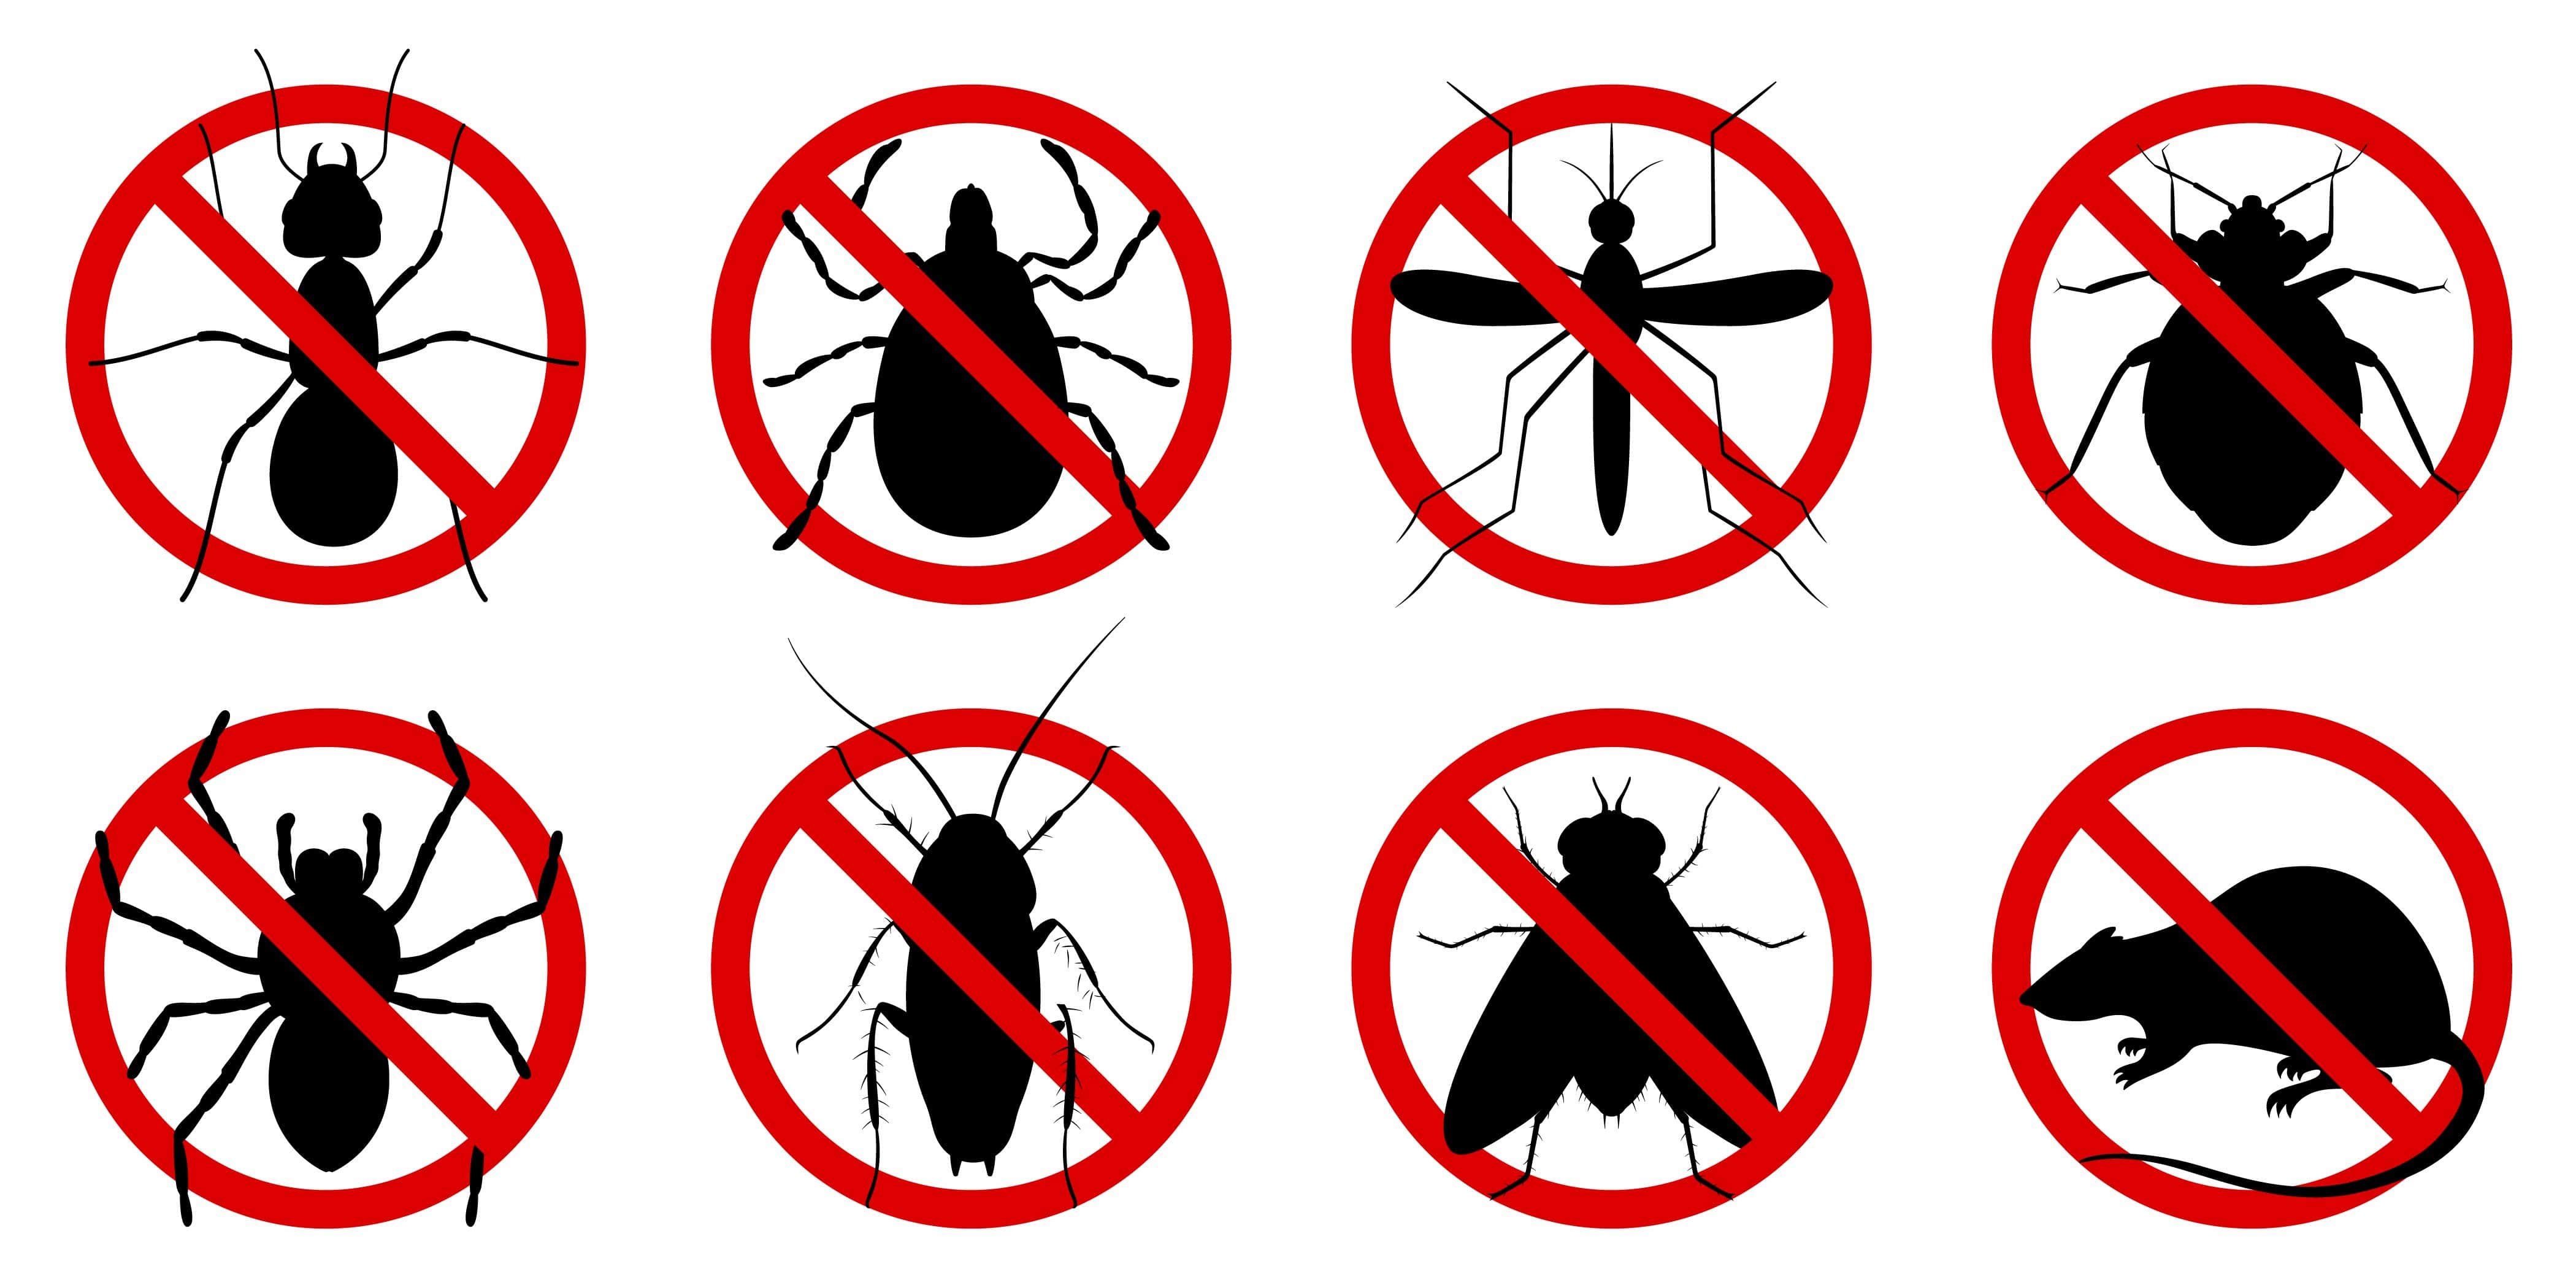 Professional home pest control services by ultima search. Trust us for effective solutions.